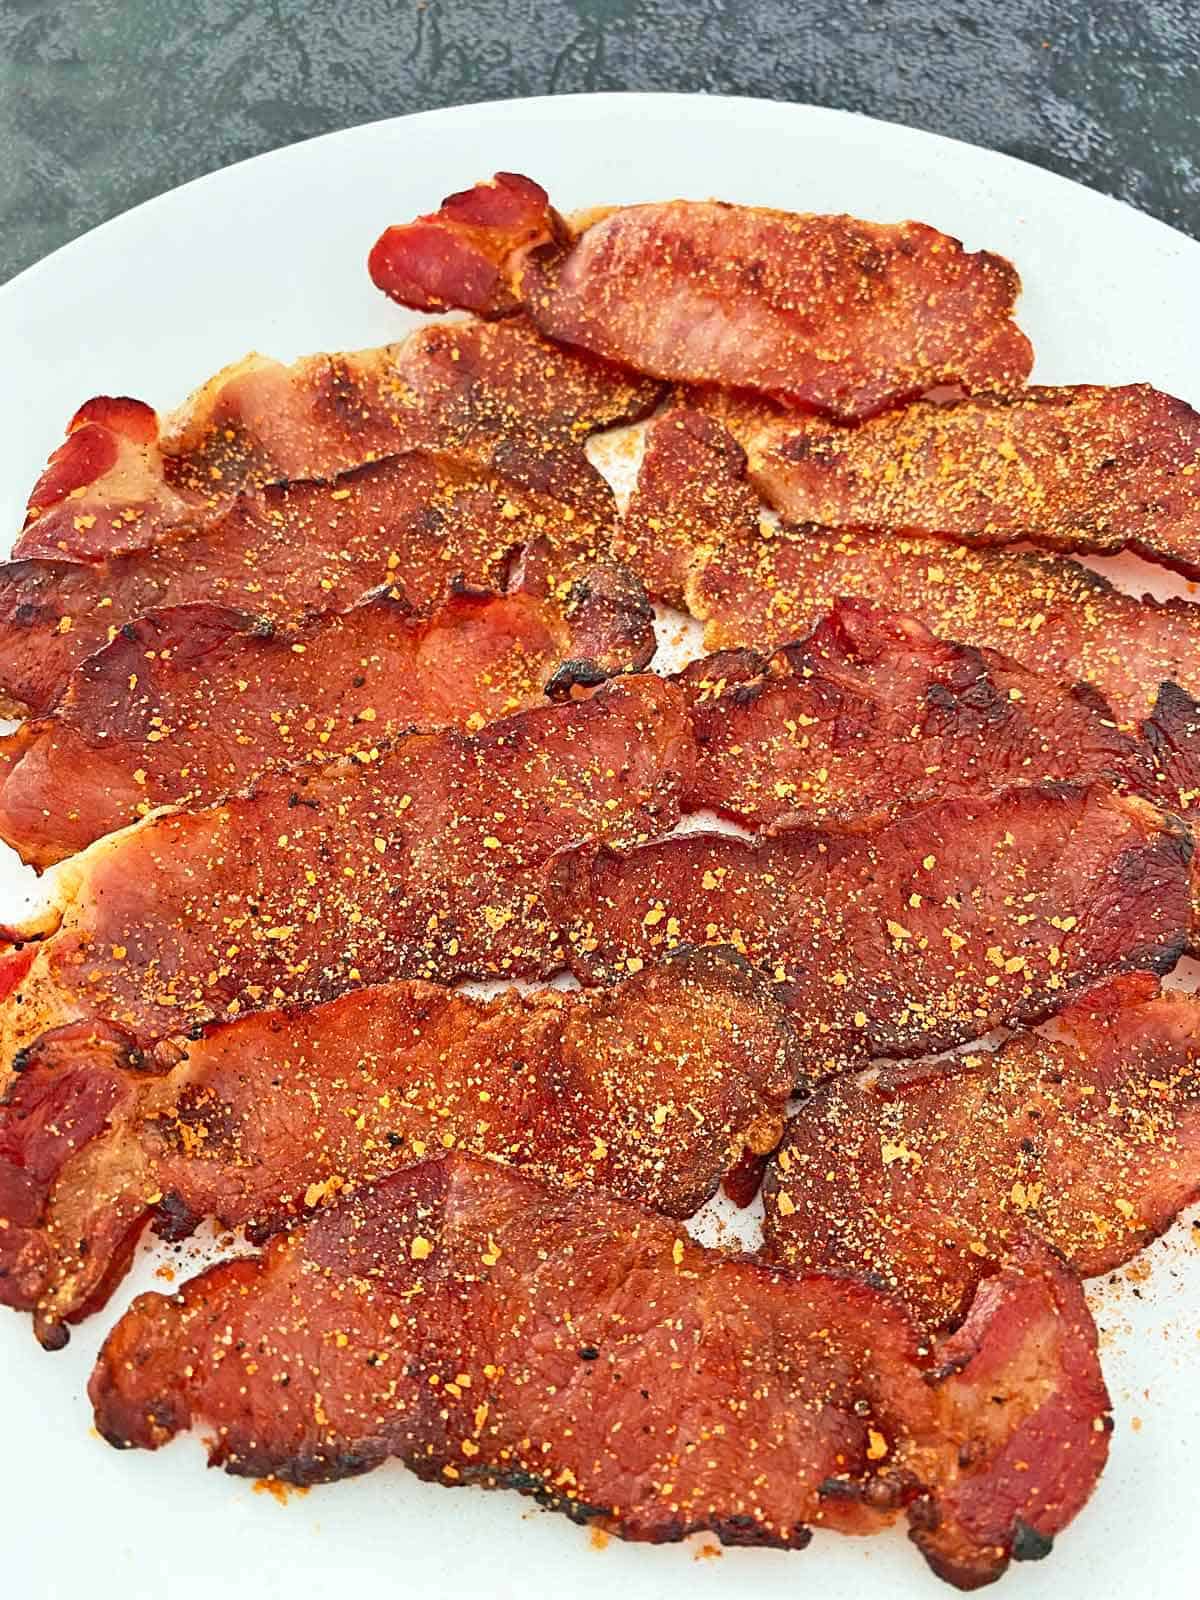 A dozen strips of cooked English back bacon on a white plate.